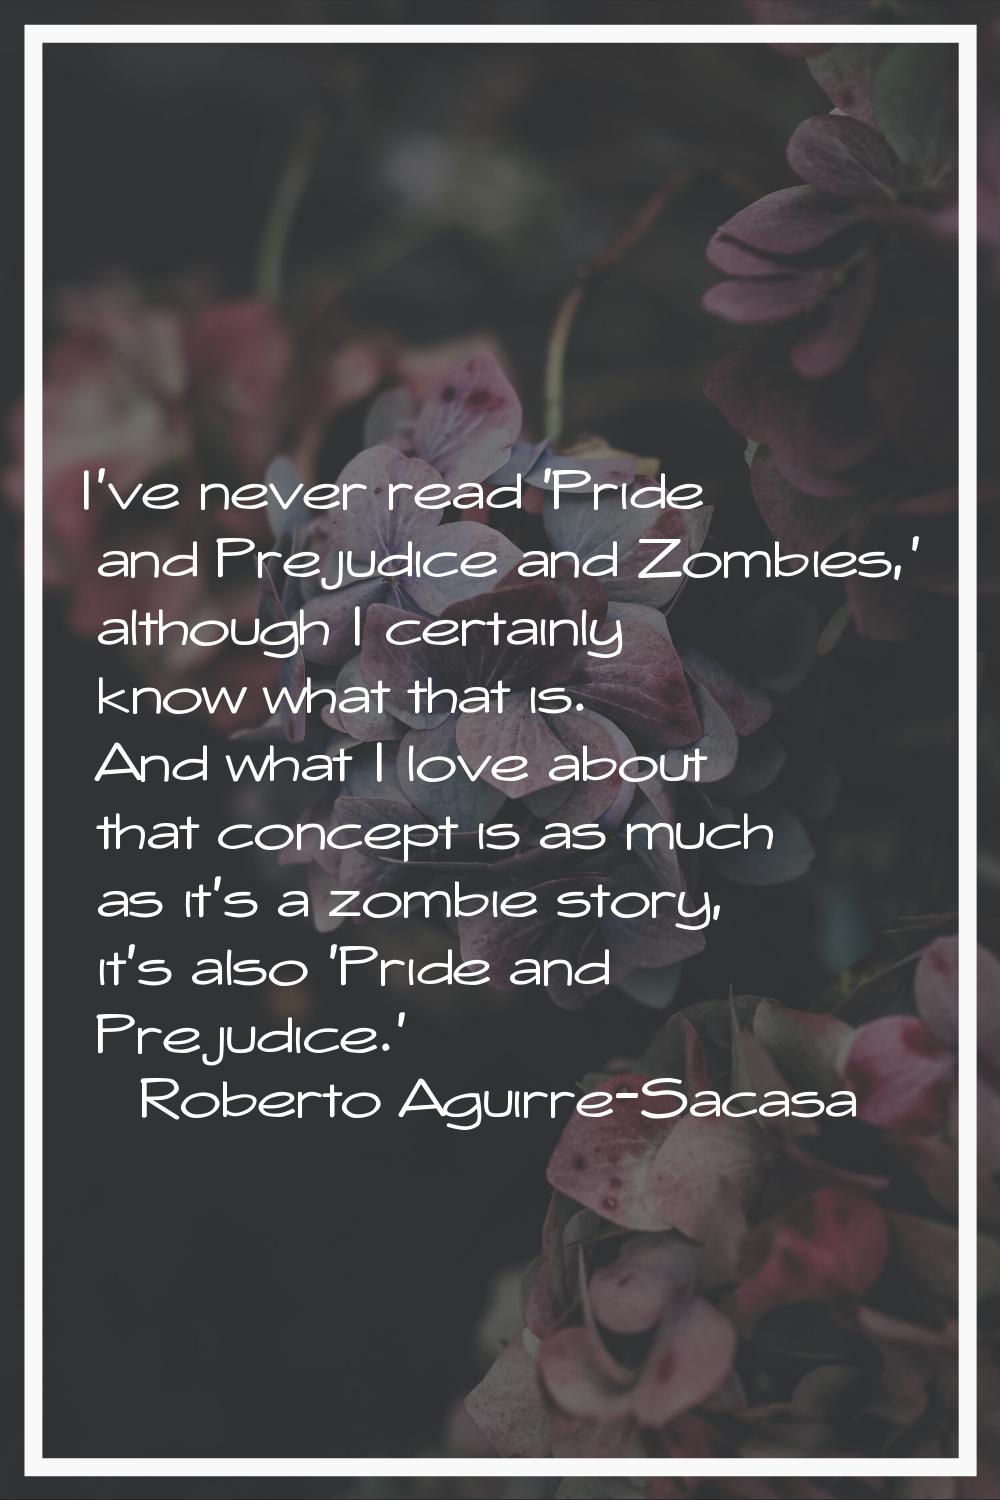 I've never read 'Pride and Prejudice and Zombies,' although I certainly know what that is. And what